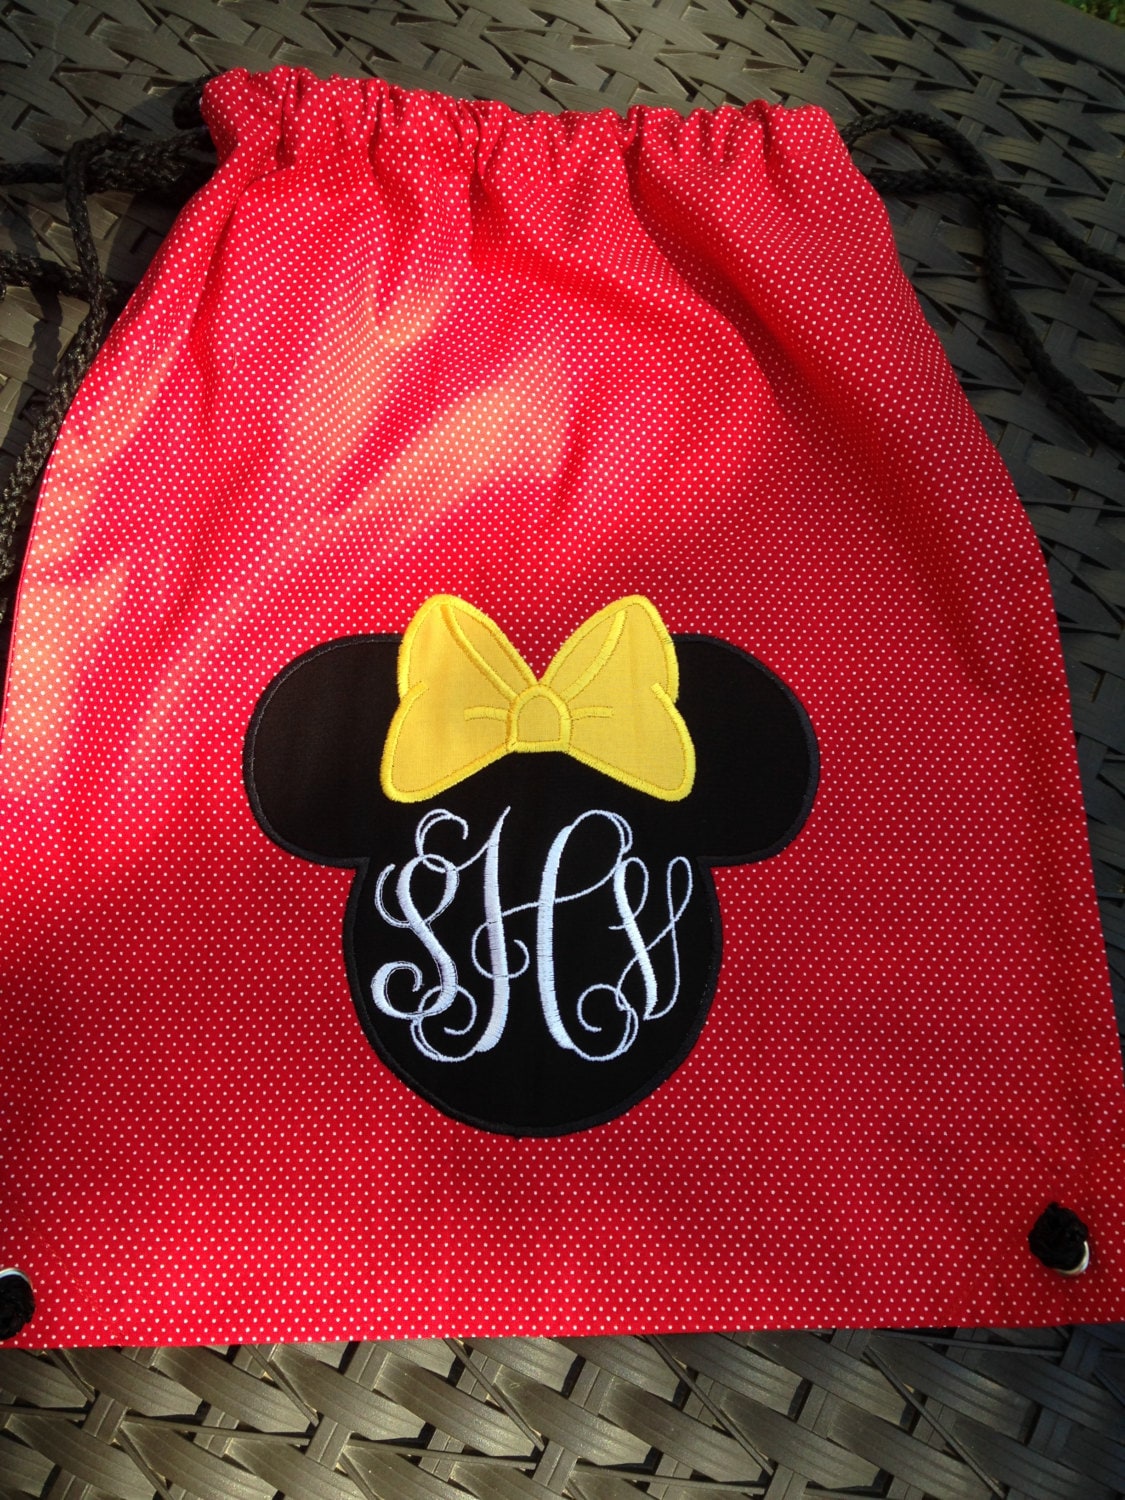 Disney Drawstring Backpack with monogrammed initials